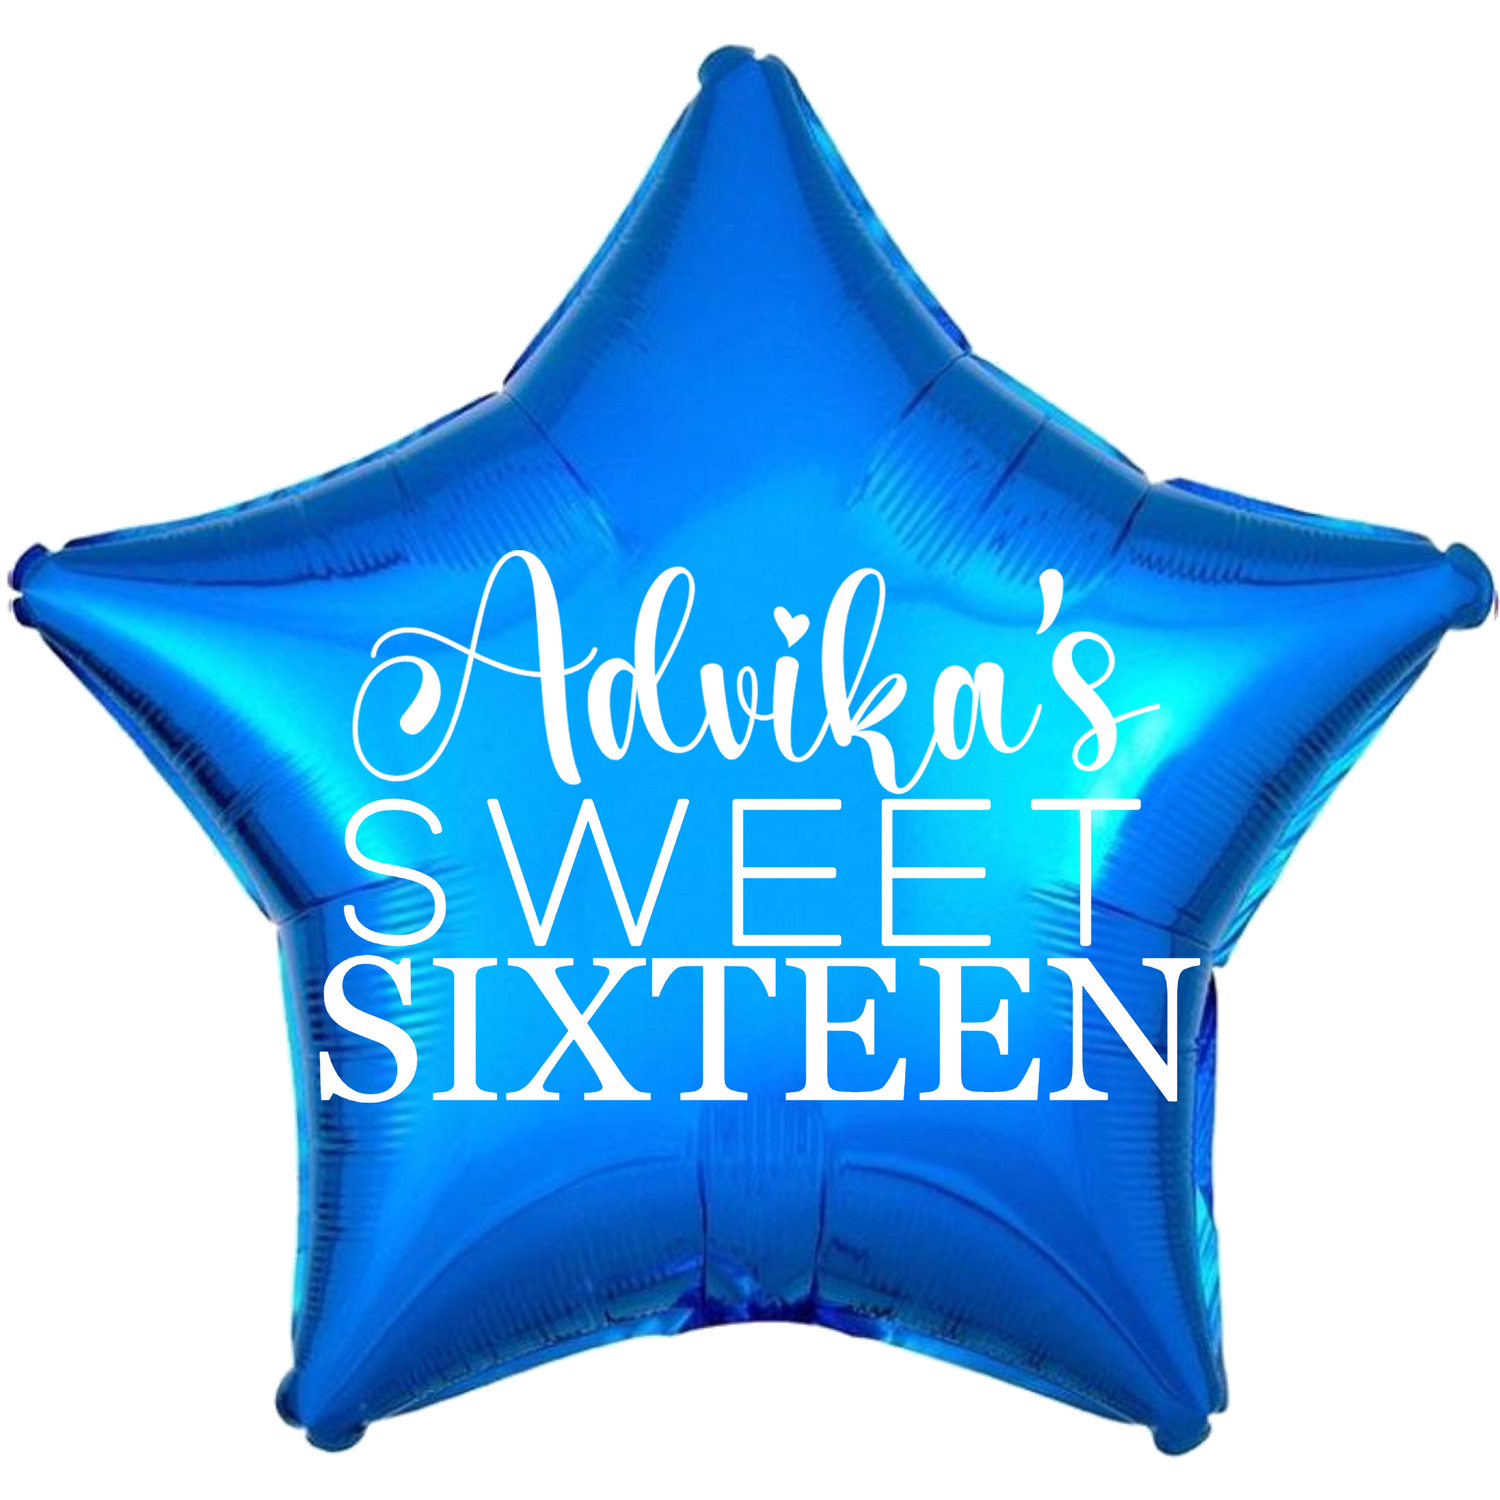 Custom Name/Text/Message Blue Star Personalized Balloons For Sixteenth Birthday Party Event. Supports Helium/Air, Luxury Bespoke Balloons Are Perfect To Surprise Your Friends/Siblings/Girlfriend On Their 16Th Birthday. Perfect For Indoor And Outdoor Decorations, Surprise Parties, Room & Hall Decorations.